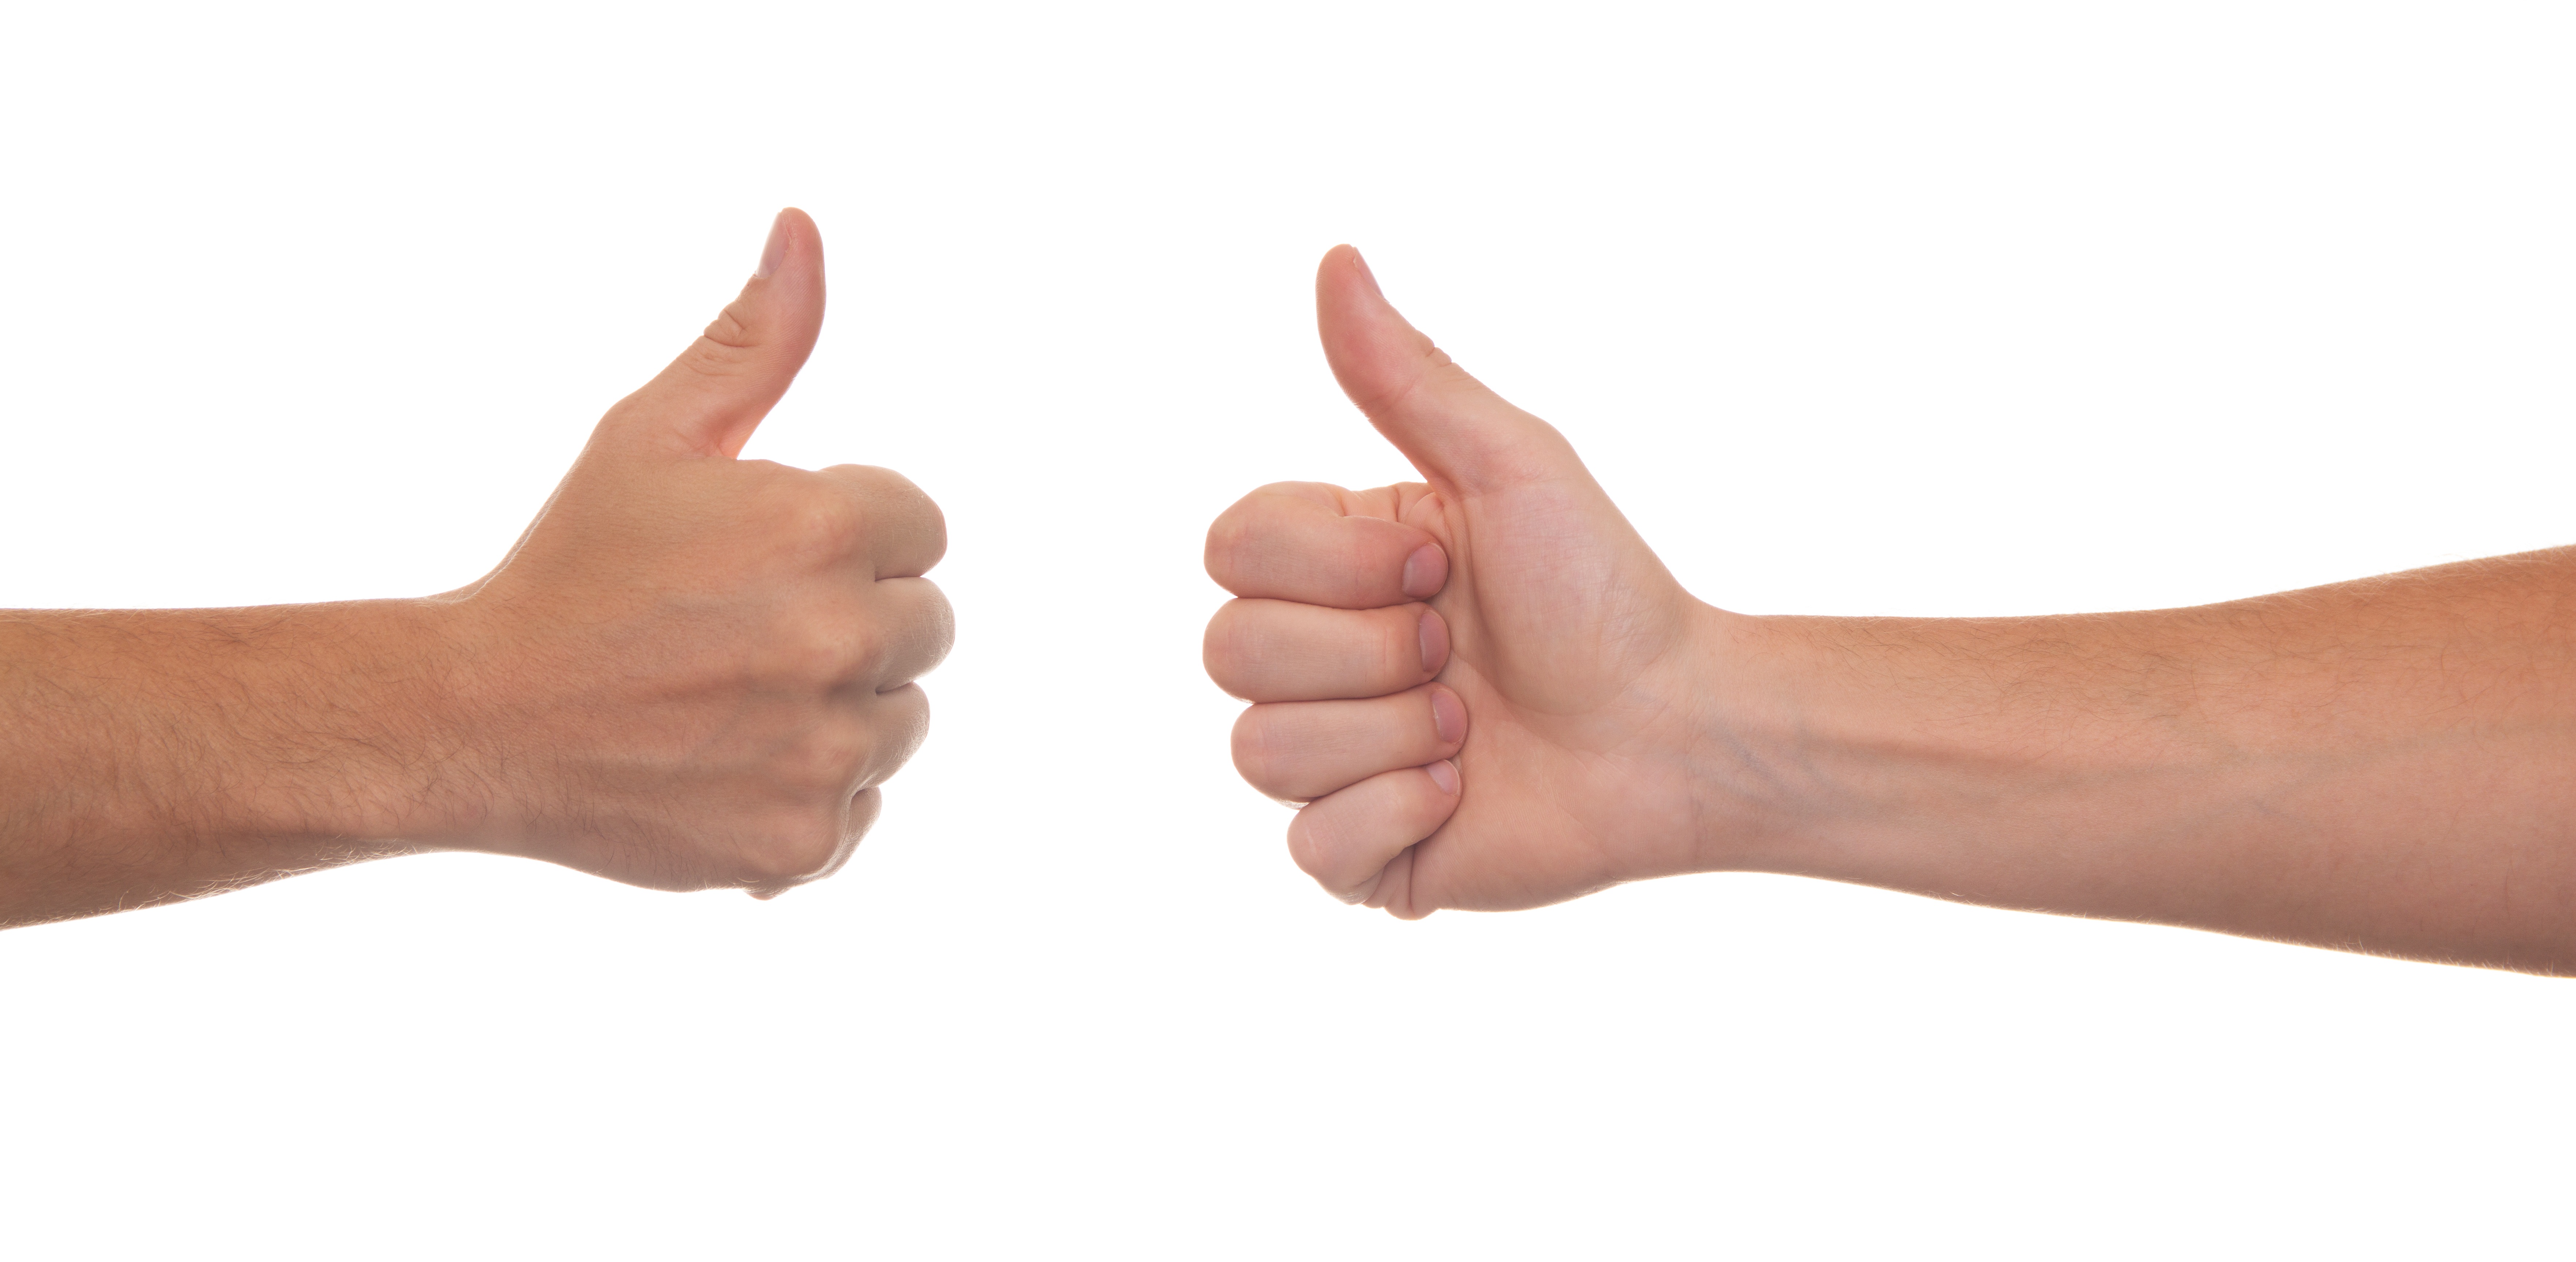 Thumbs up by two people